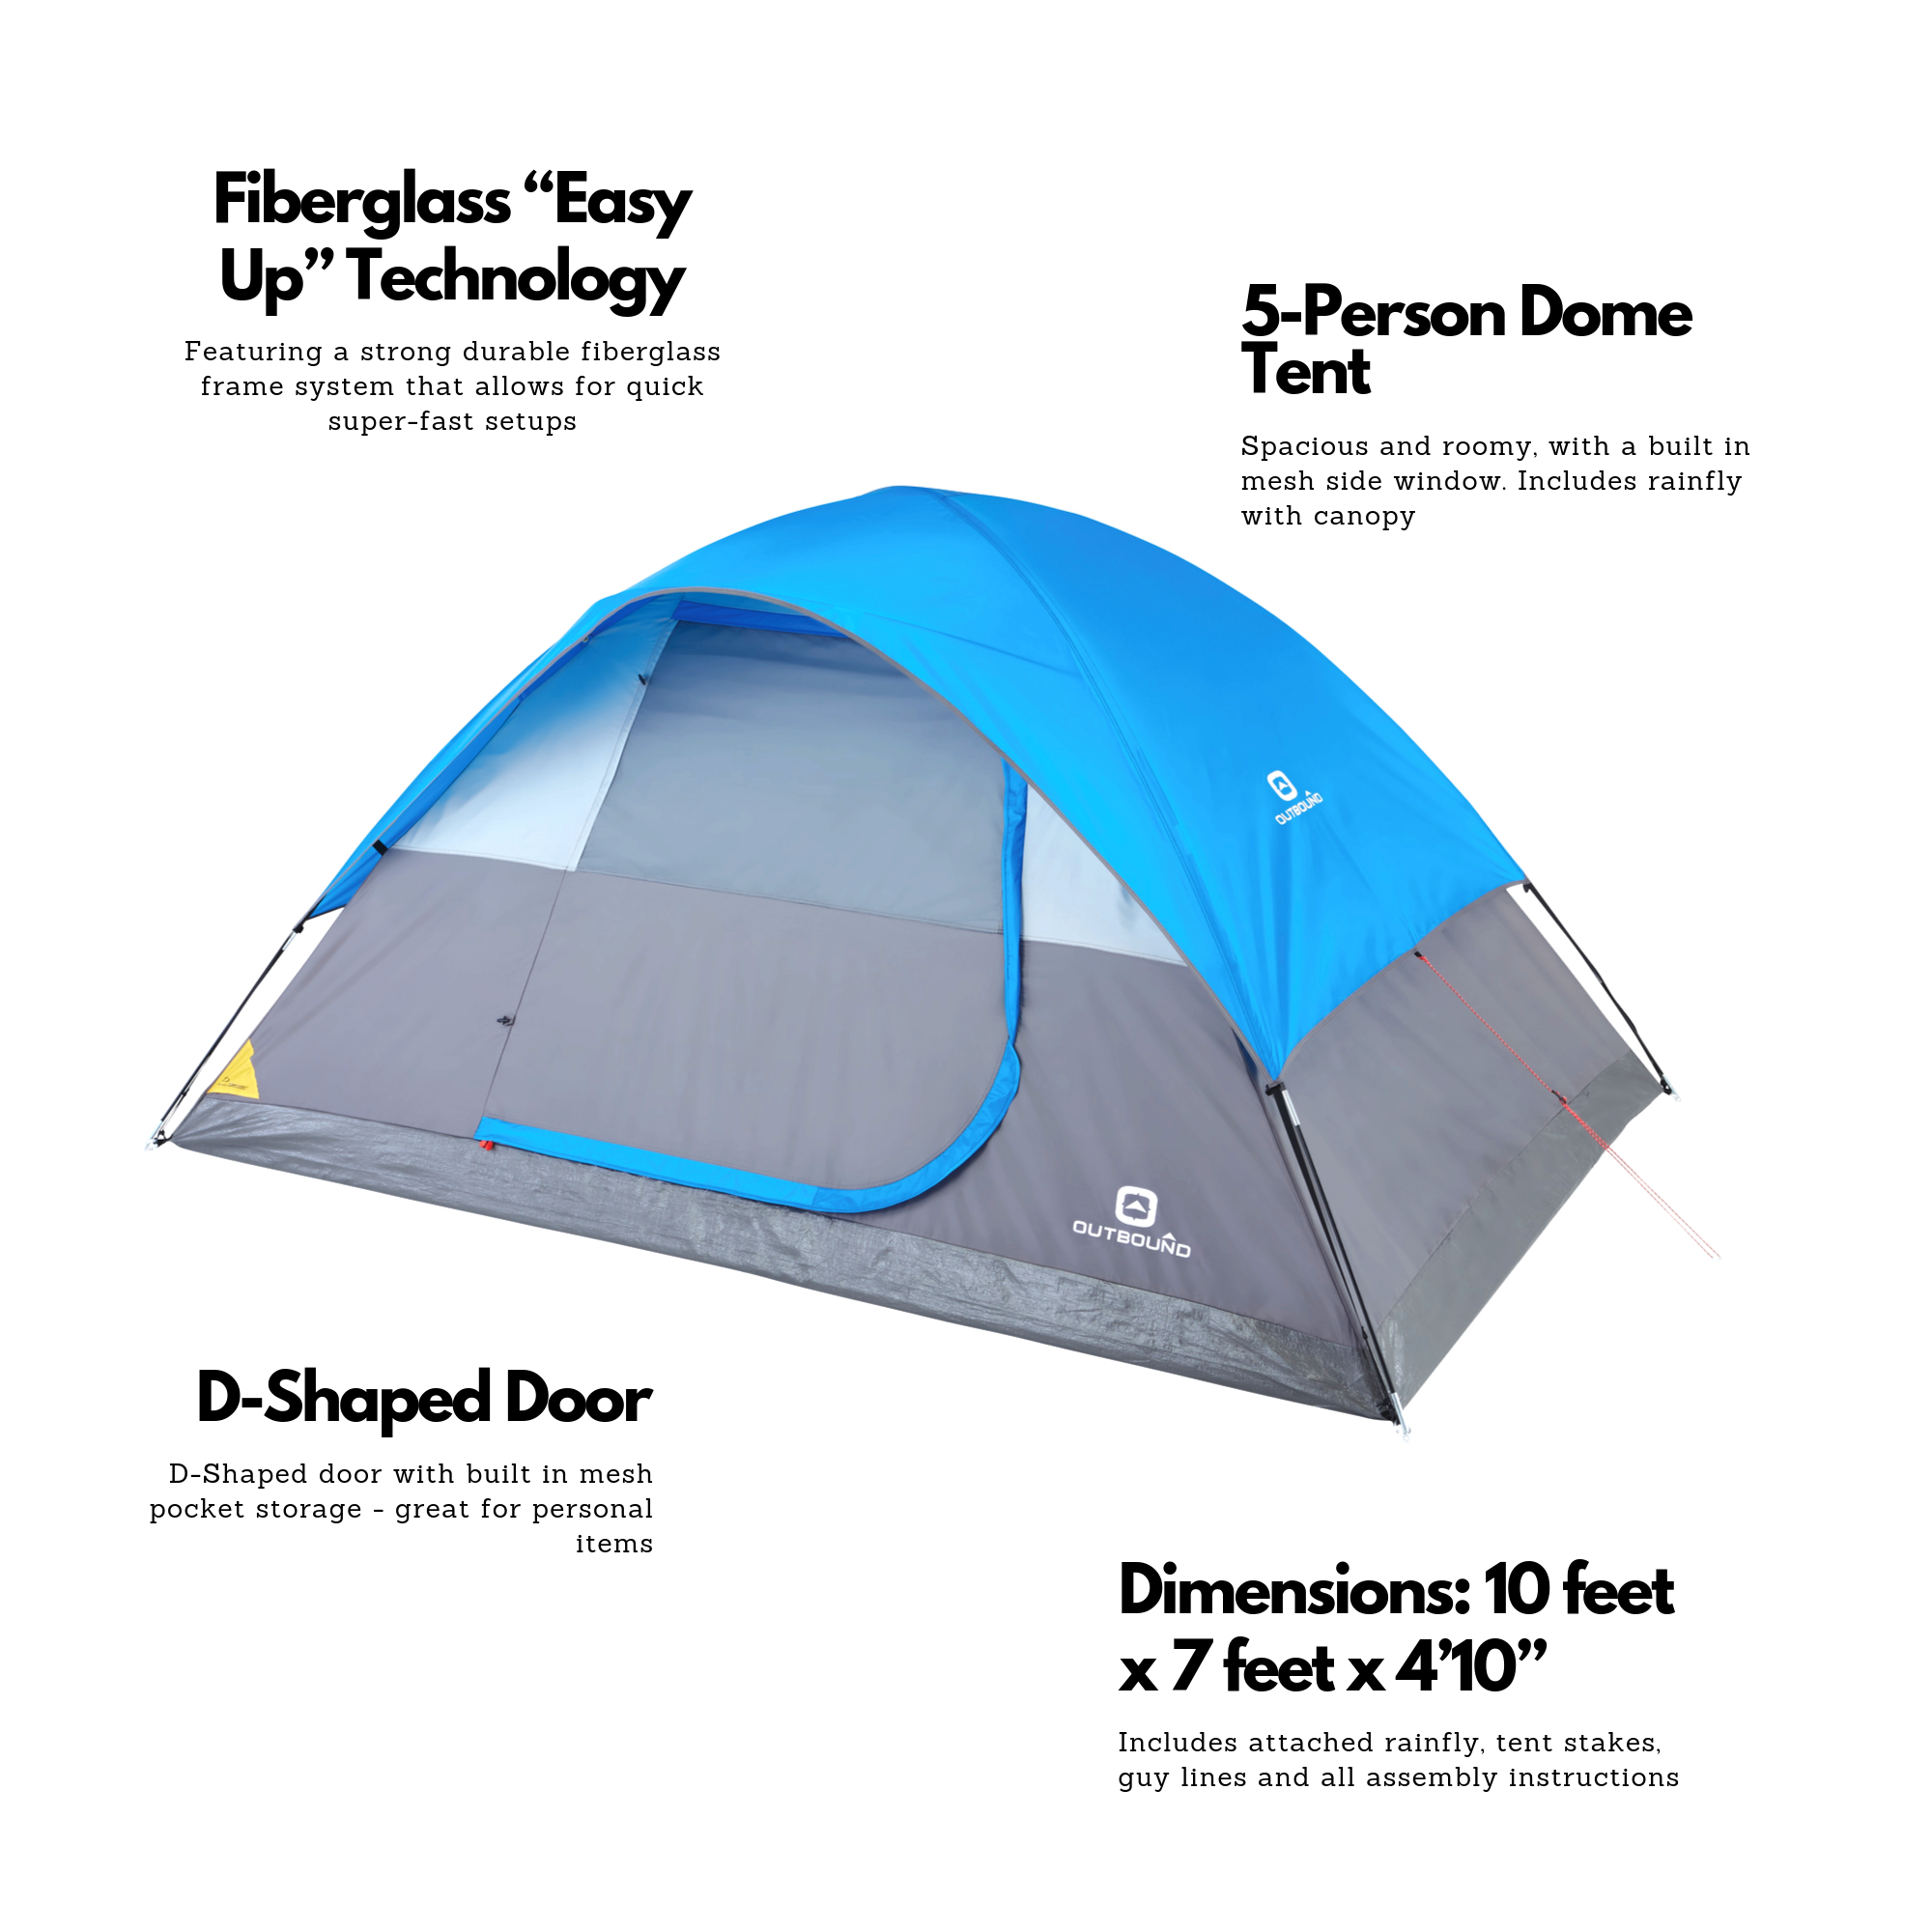 5 person camping tent